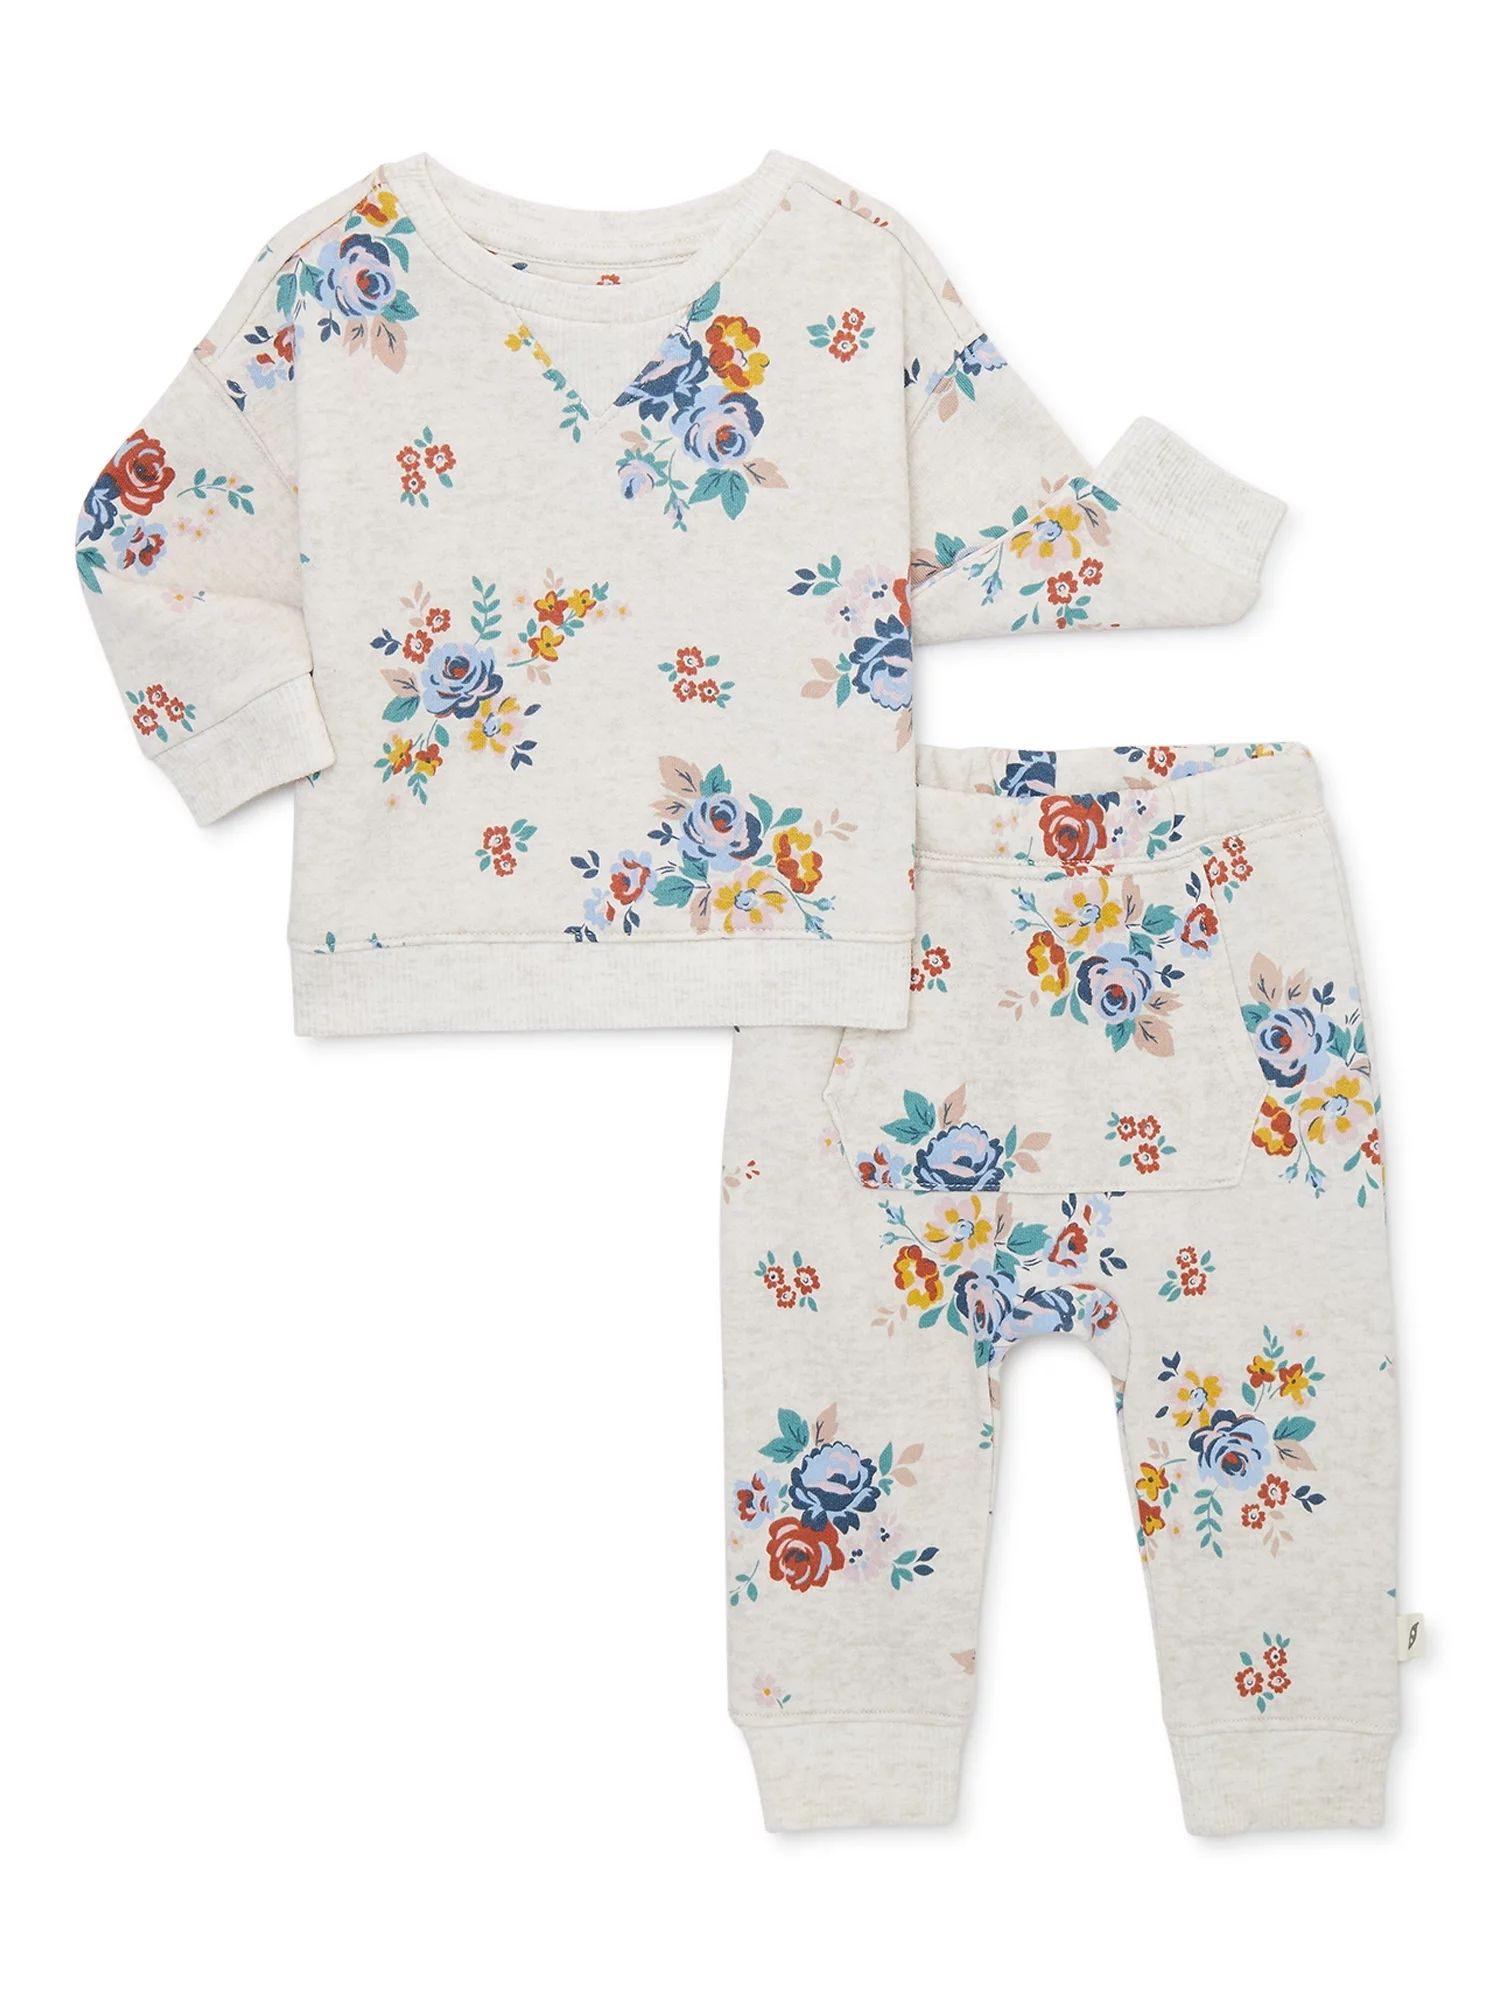 easy-peasy Baby Print Sweatshirt and Jogger Pants Outfit Set, 2-Piece, Sizes 0/3-24 Months | Walmart (US)